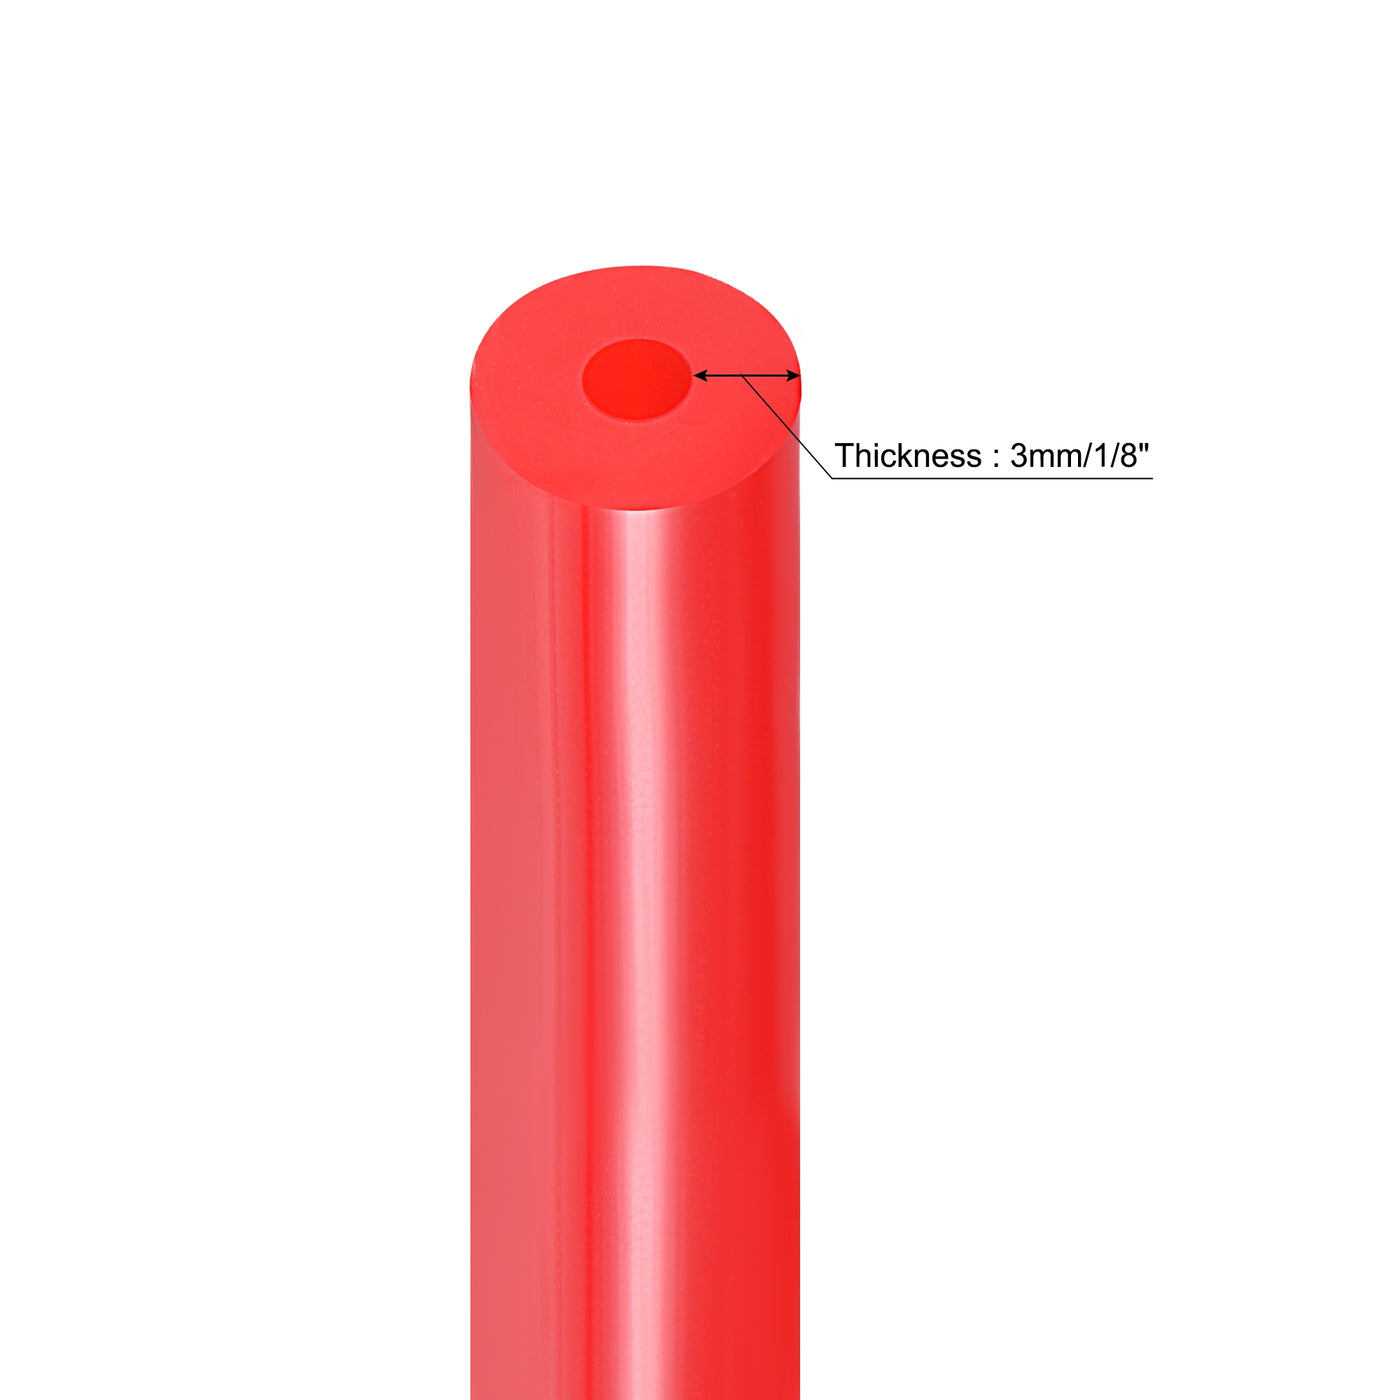 Harfington Vacuum Silicone Tubing Hose 3/16" 1/4" 5/16" 3/8" 1/2" ID 1/8" Wall Thick 5ft Red High Temperature for Engine